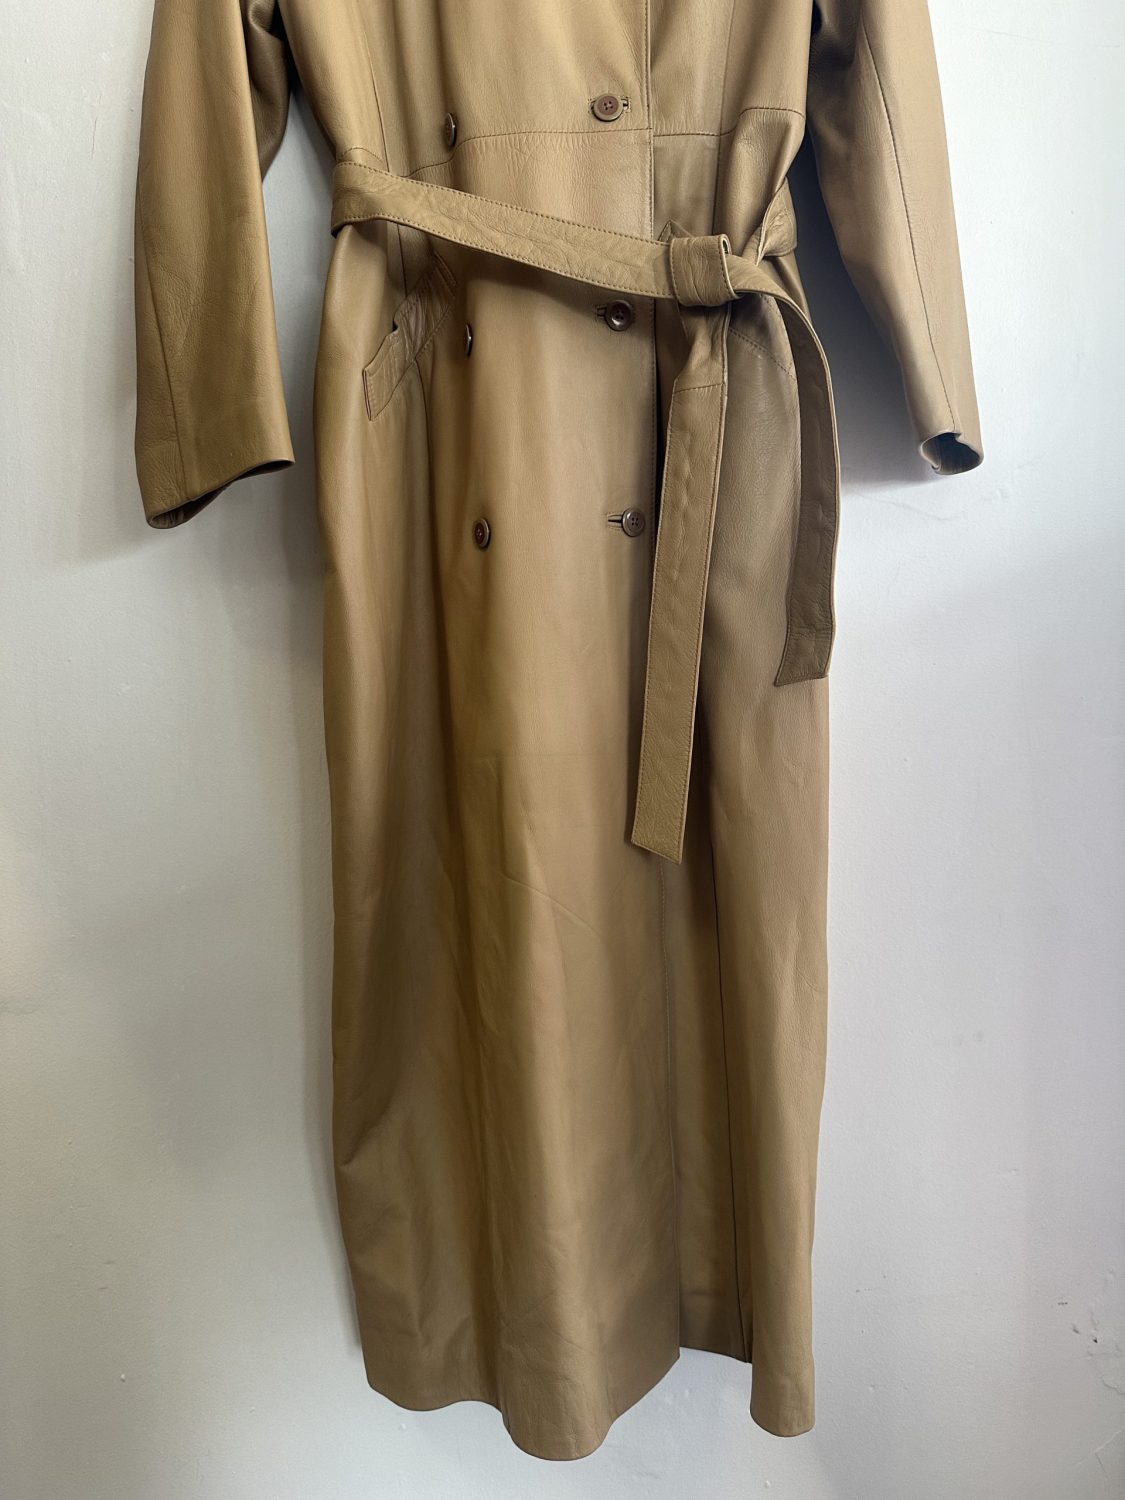 EXTRA LONG VINTAGE BEIGE LEATHER 'DORMEUIL' COAT FROM ENGLAND | Chaos ...